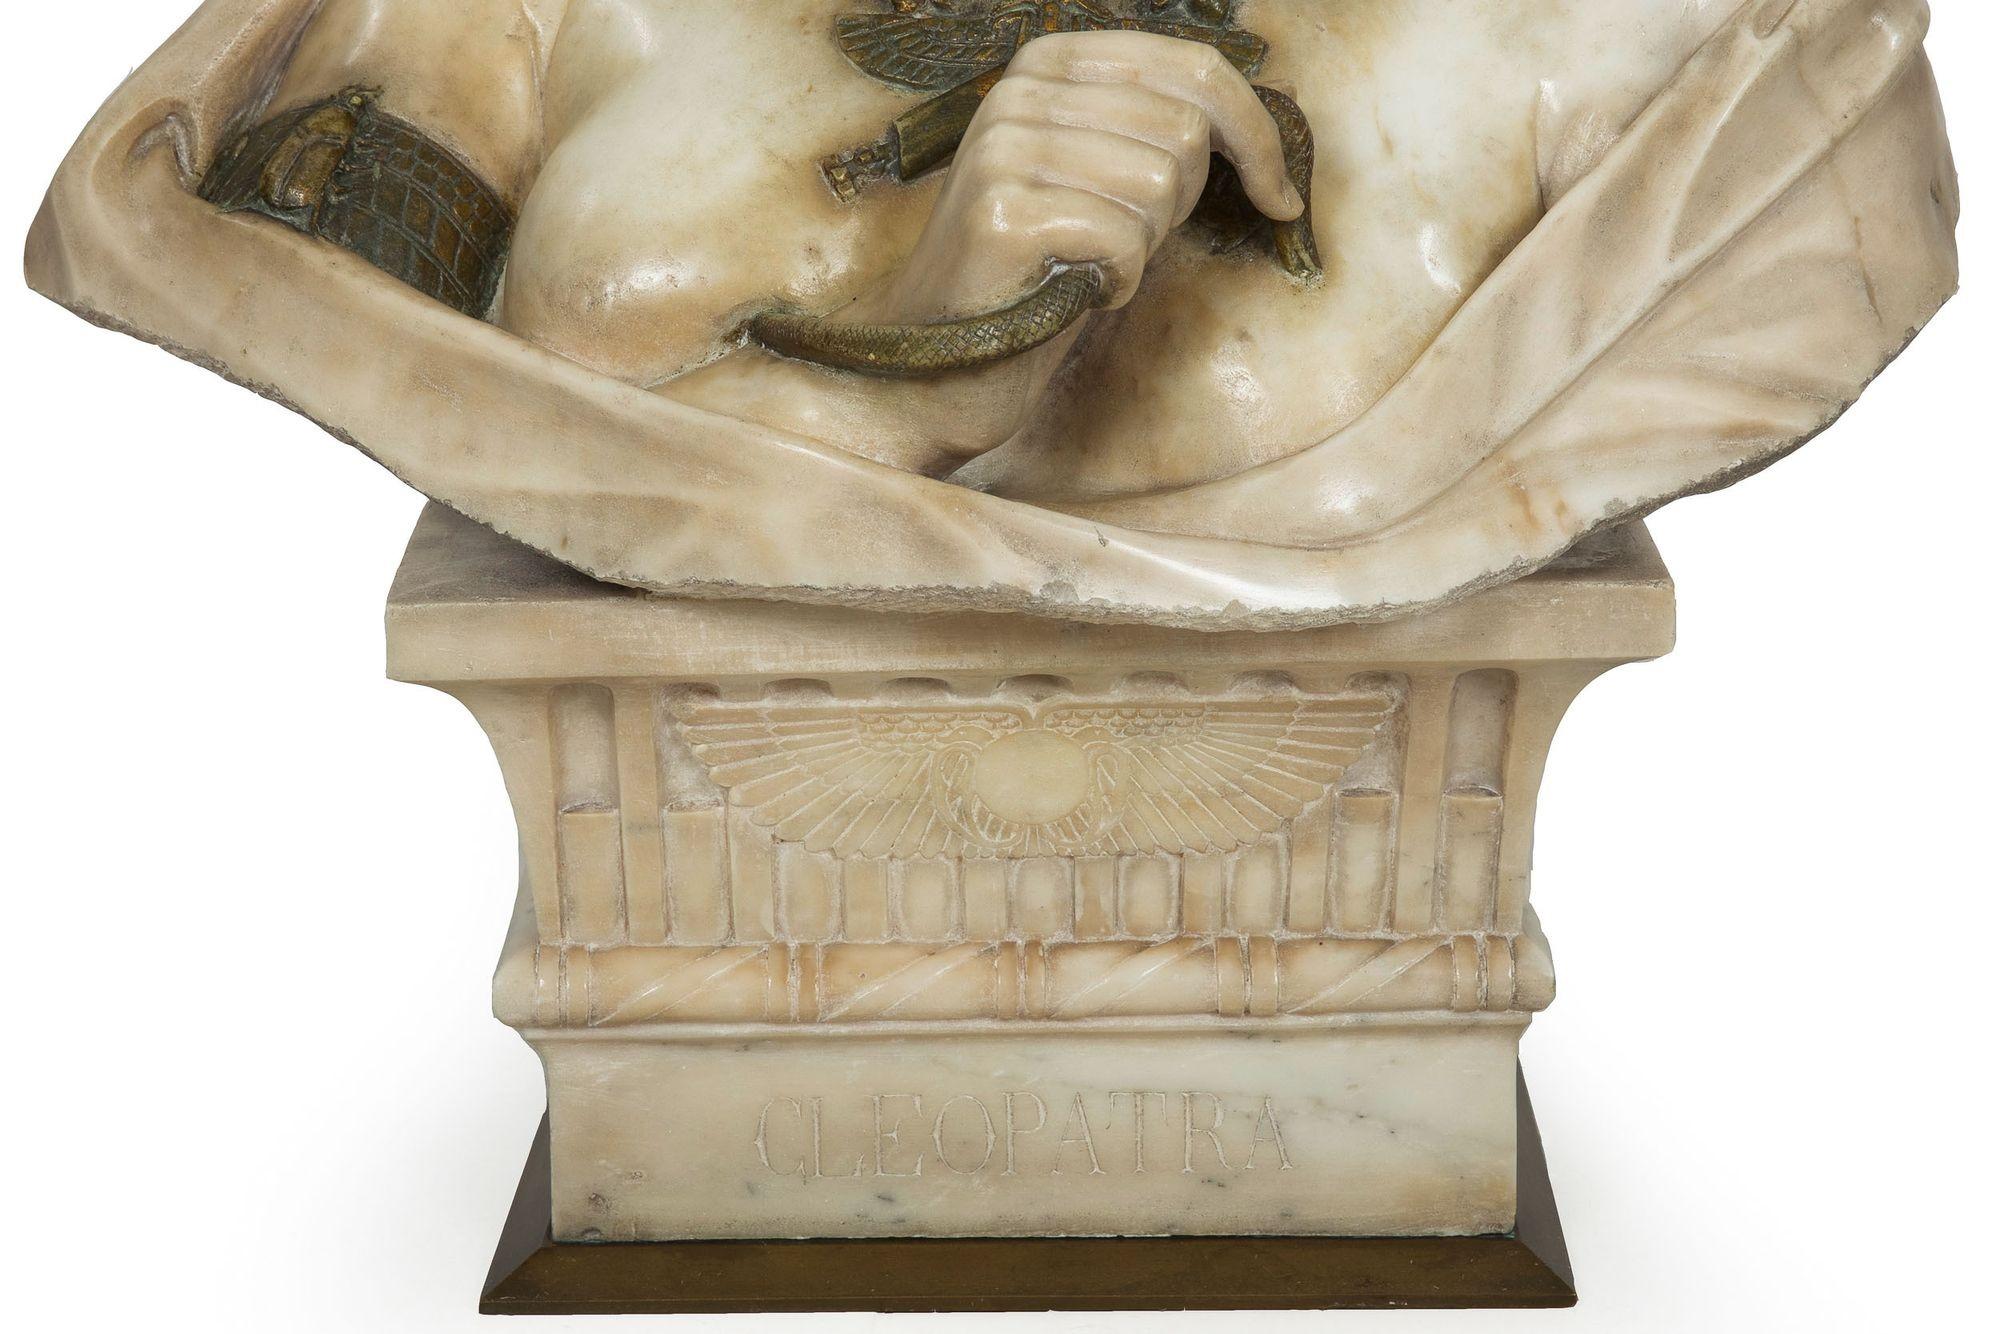 Italian Marble Sculpture “Bust of Cleopatra” by Aristide Petrilli